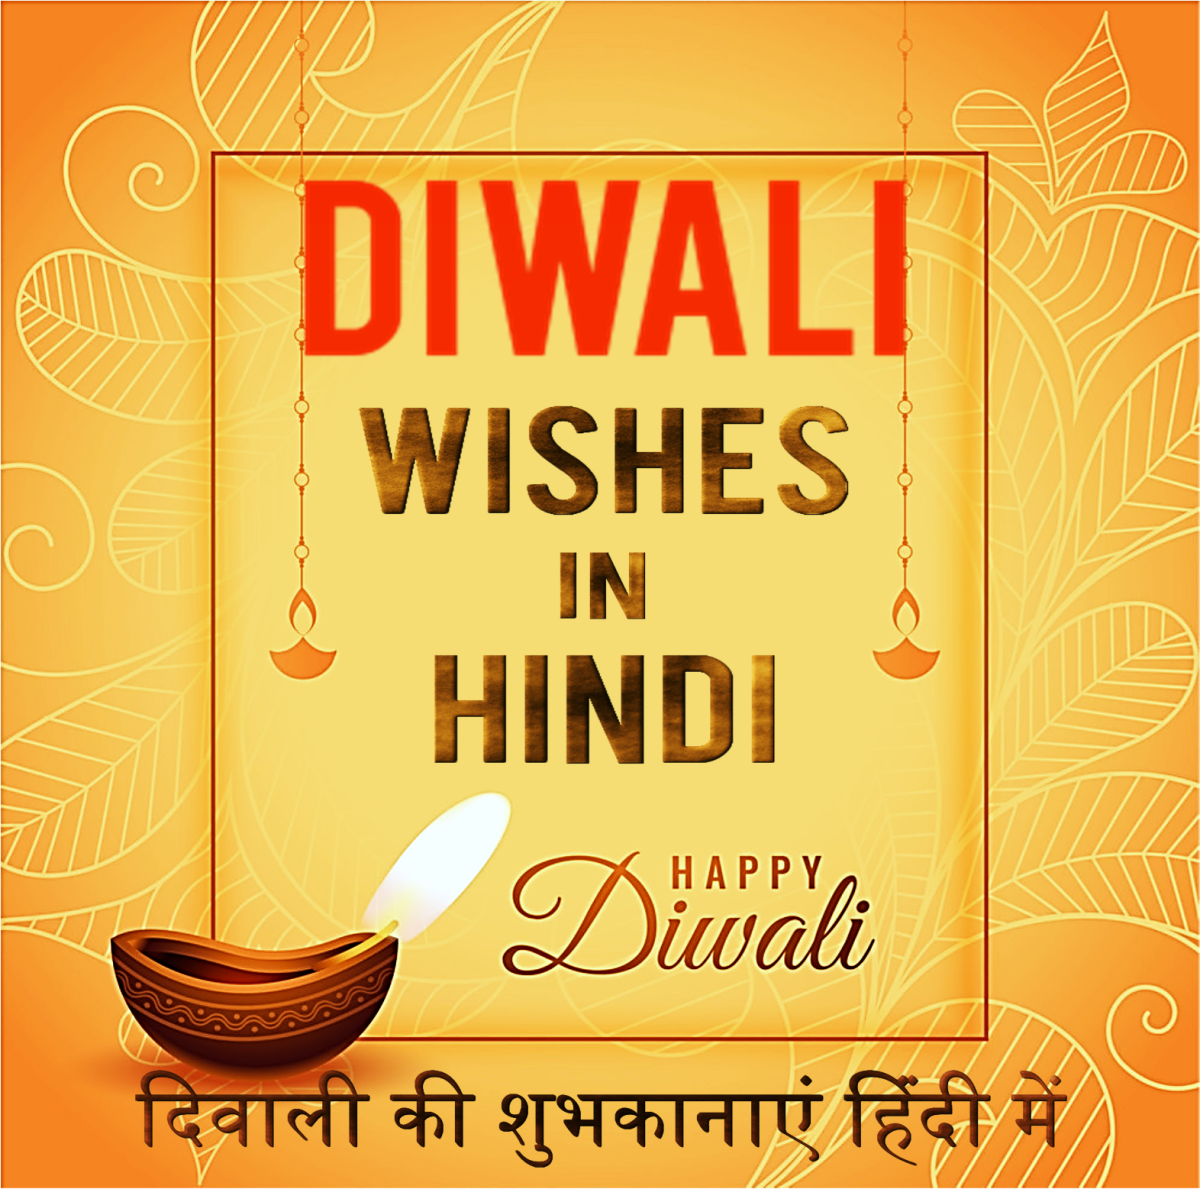 Diwali Best Wishes and Messages in Hindi & Sanskrit